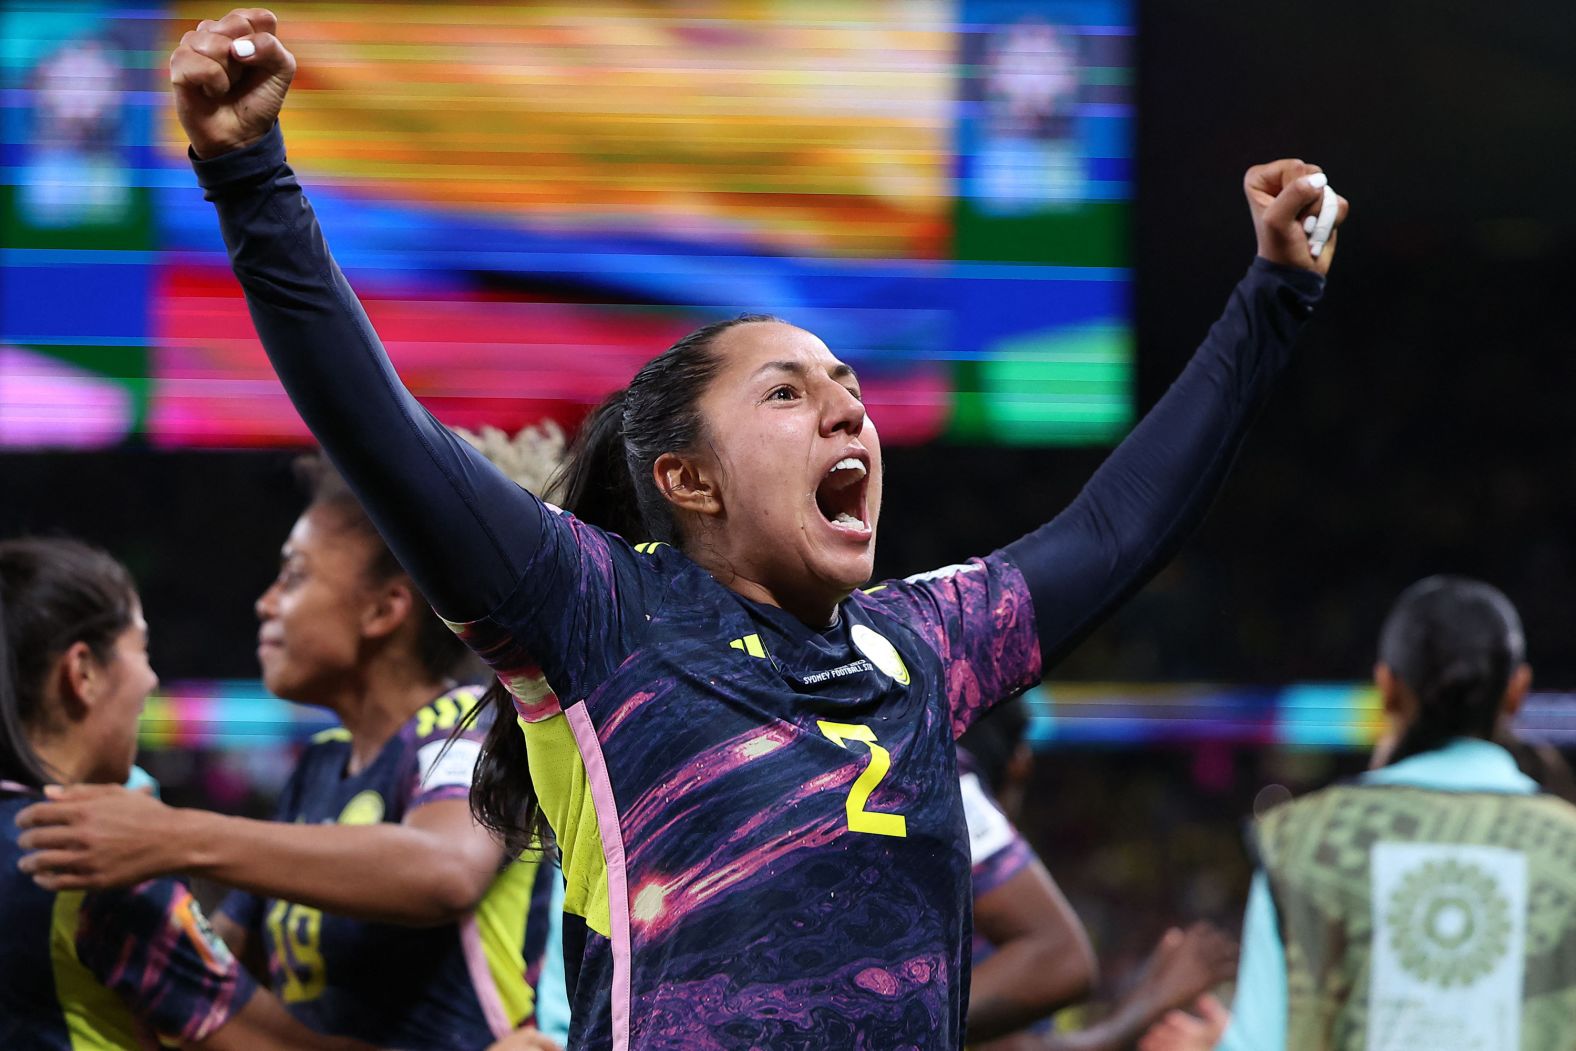 Colombia's Manuela Vanegas celebrates her team's winning goal against Germany on June 30. The goal came in the final seconds of the match and lifted Colombia to a <a href="index.php?page=&url=https%3A%2F%2Fwww.cnn.com%2F2023%2F07%2F30%2Ffootball%2Flinda-caicedo-germany-colombia-womens-world-cup-spt-intl%2Findex.html" target="_blank">2-1 victory</a>.